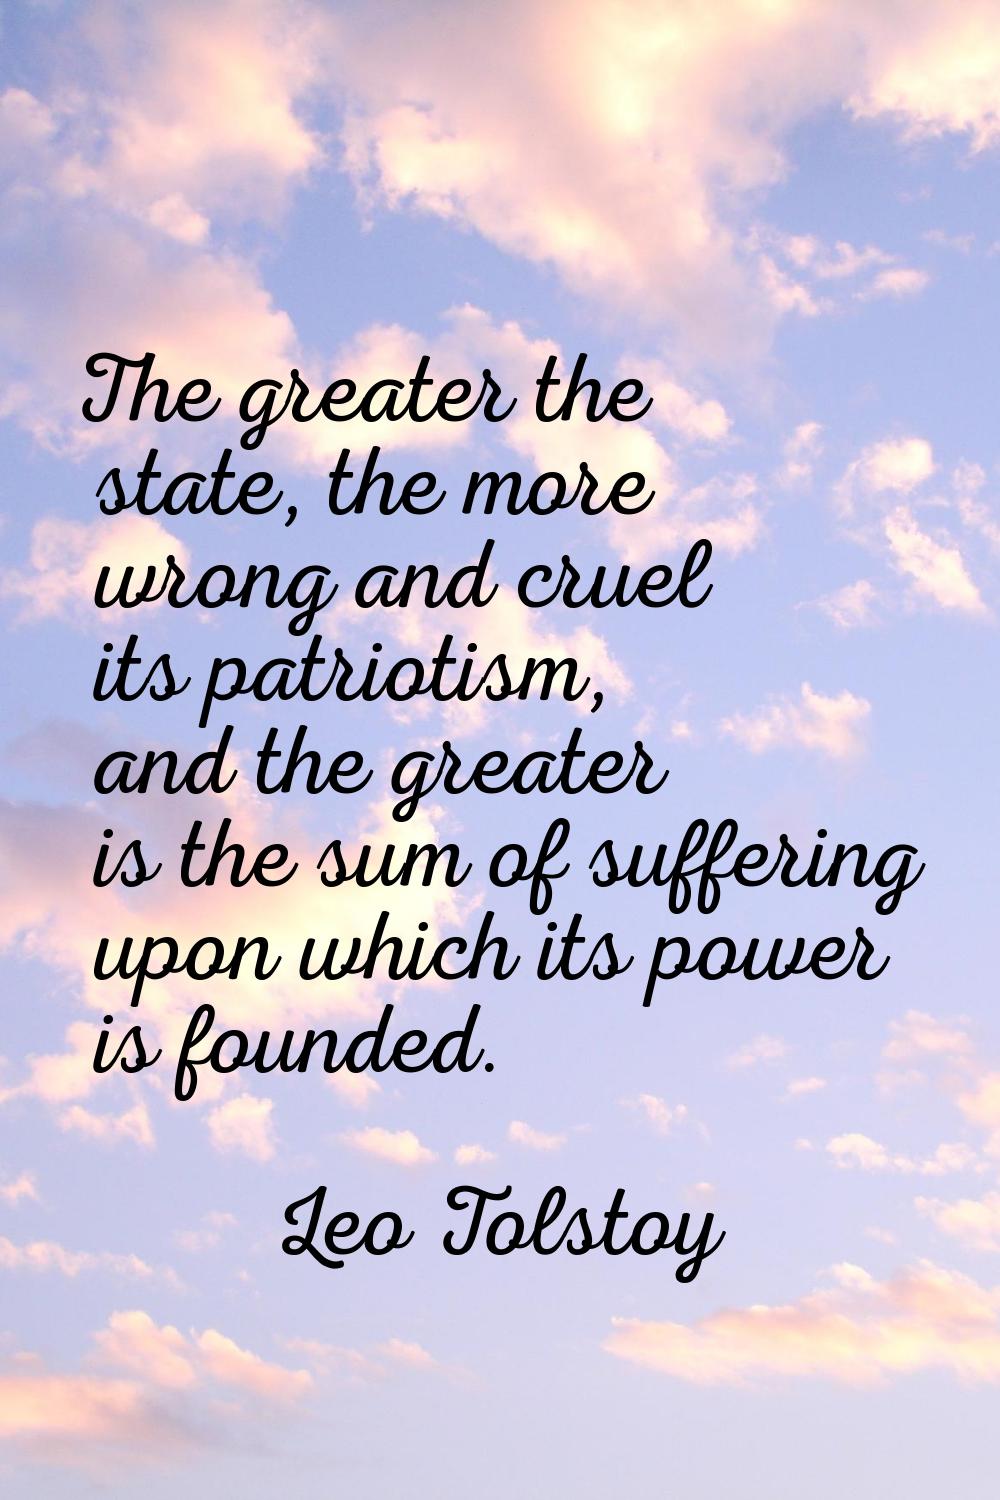 The greater the state, the more wrong and cruel its patriotism, and the greater is the sum of suffe